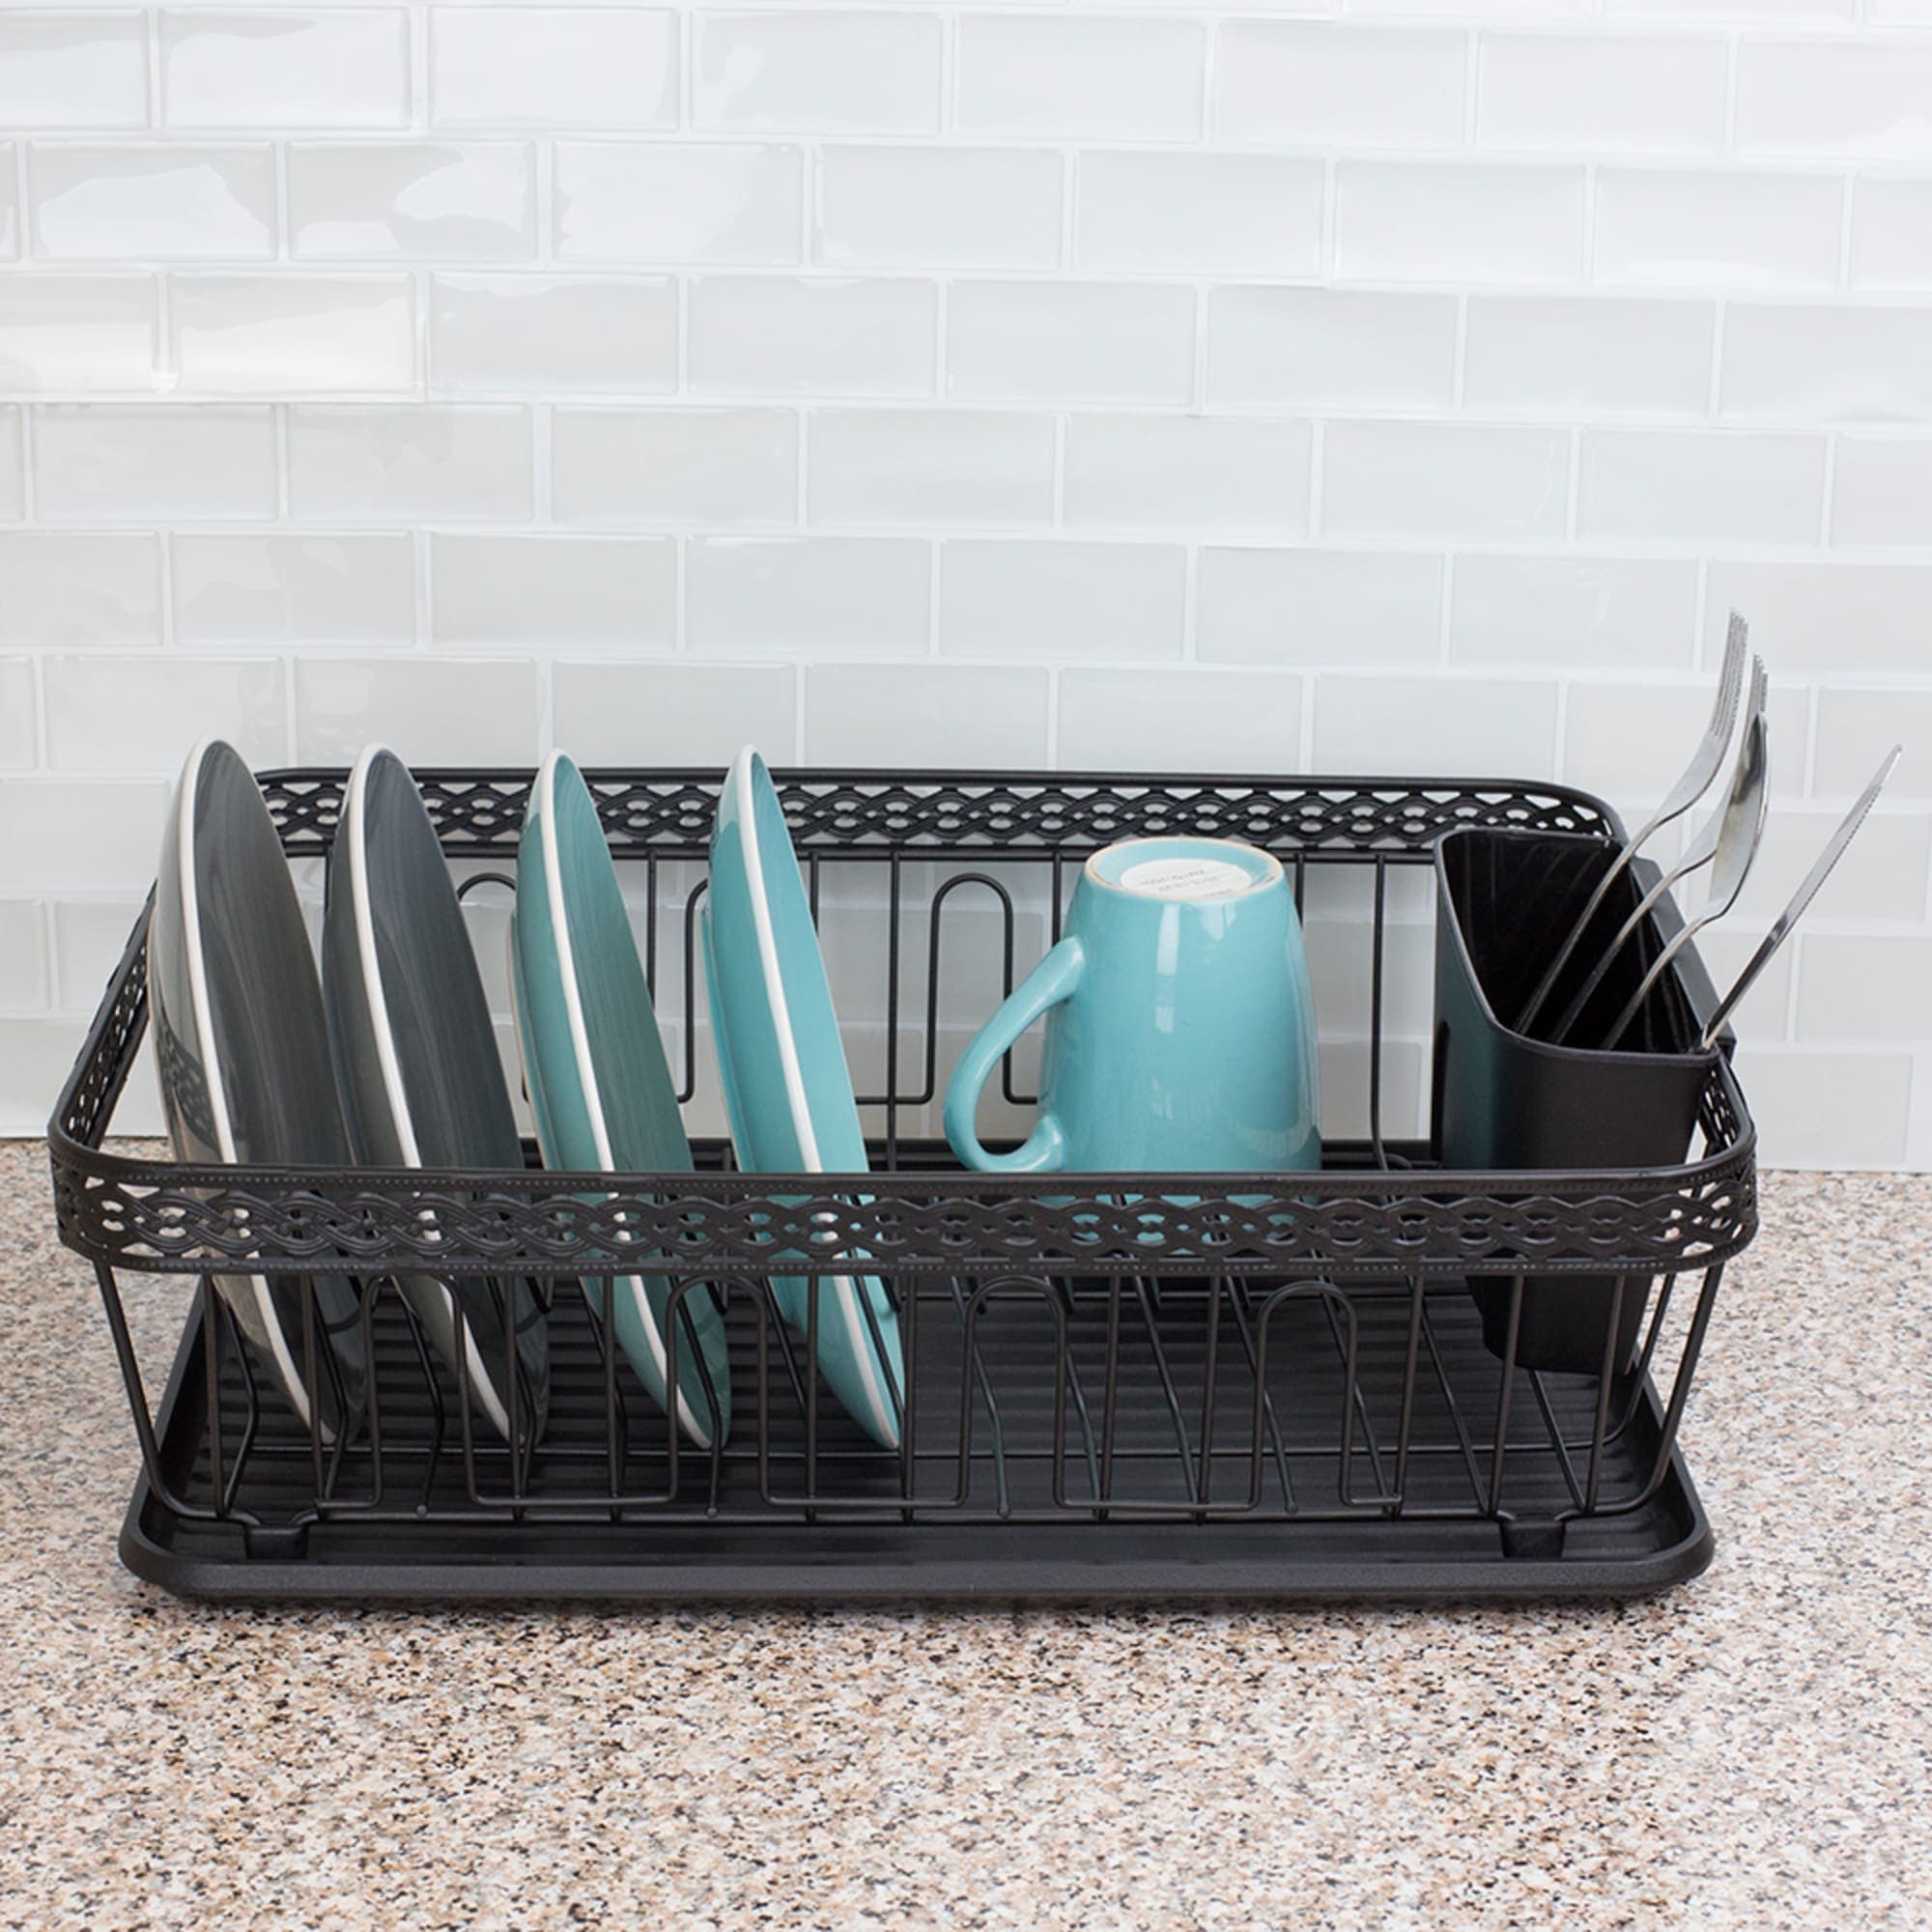 Home Basics 3 Piece Decorative Wire Dish Rack, Black $15.00 EACH, CASE PACK OF 6